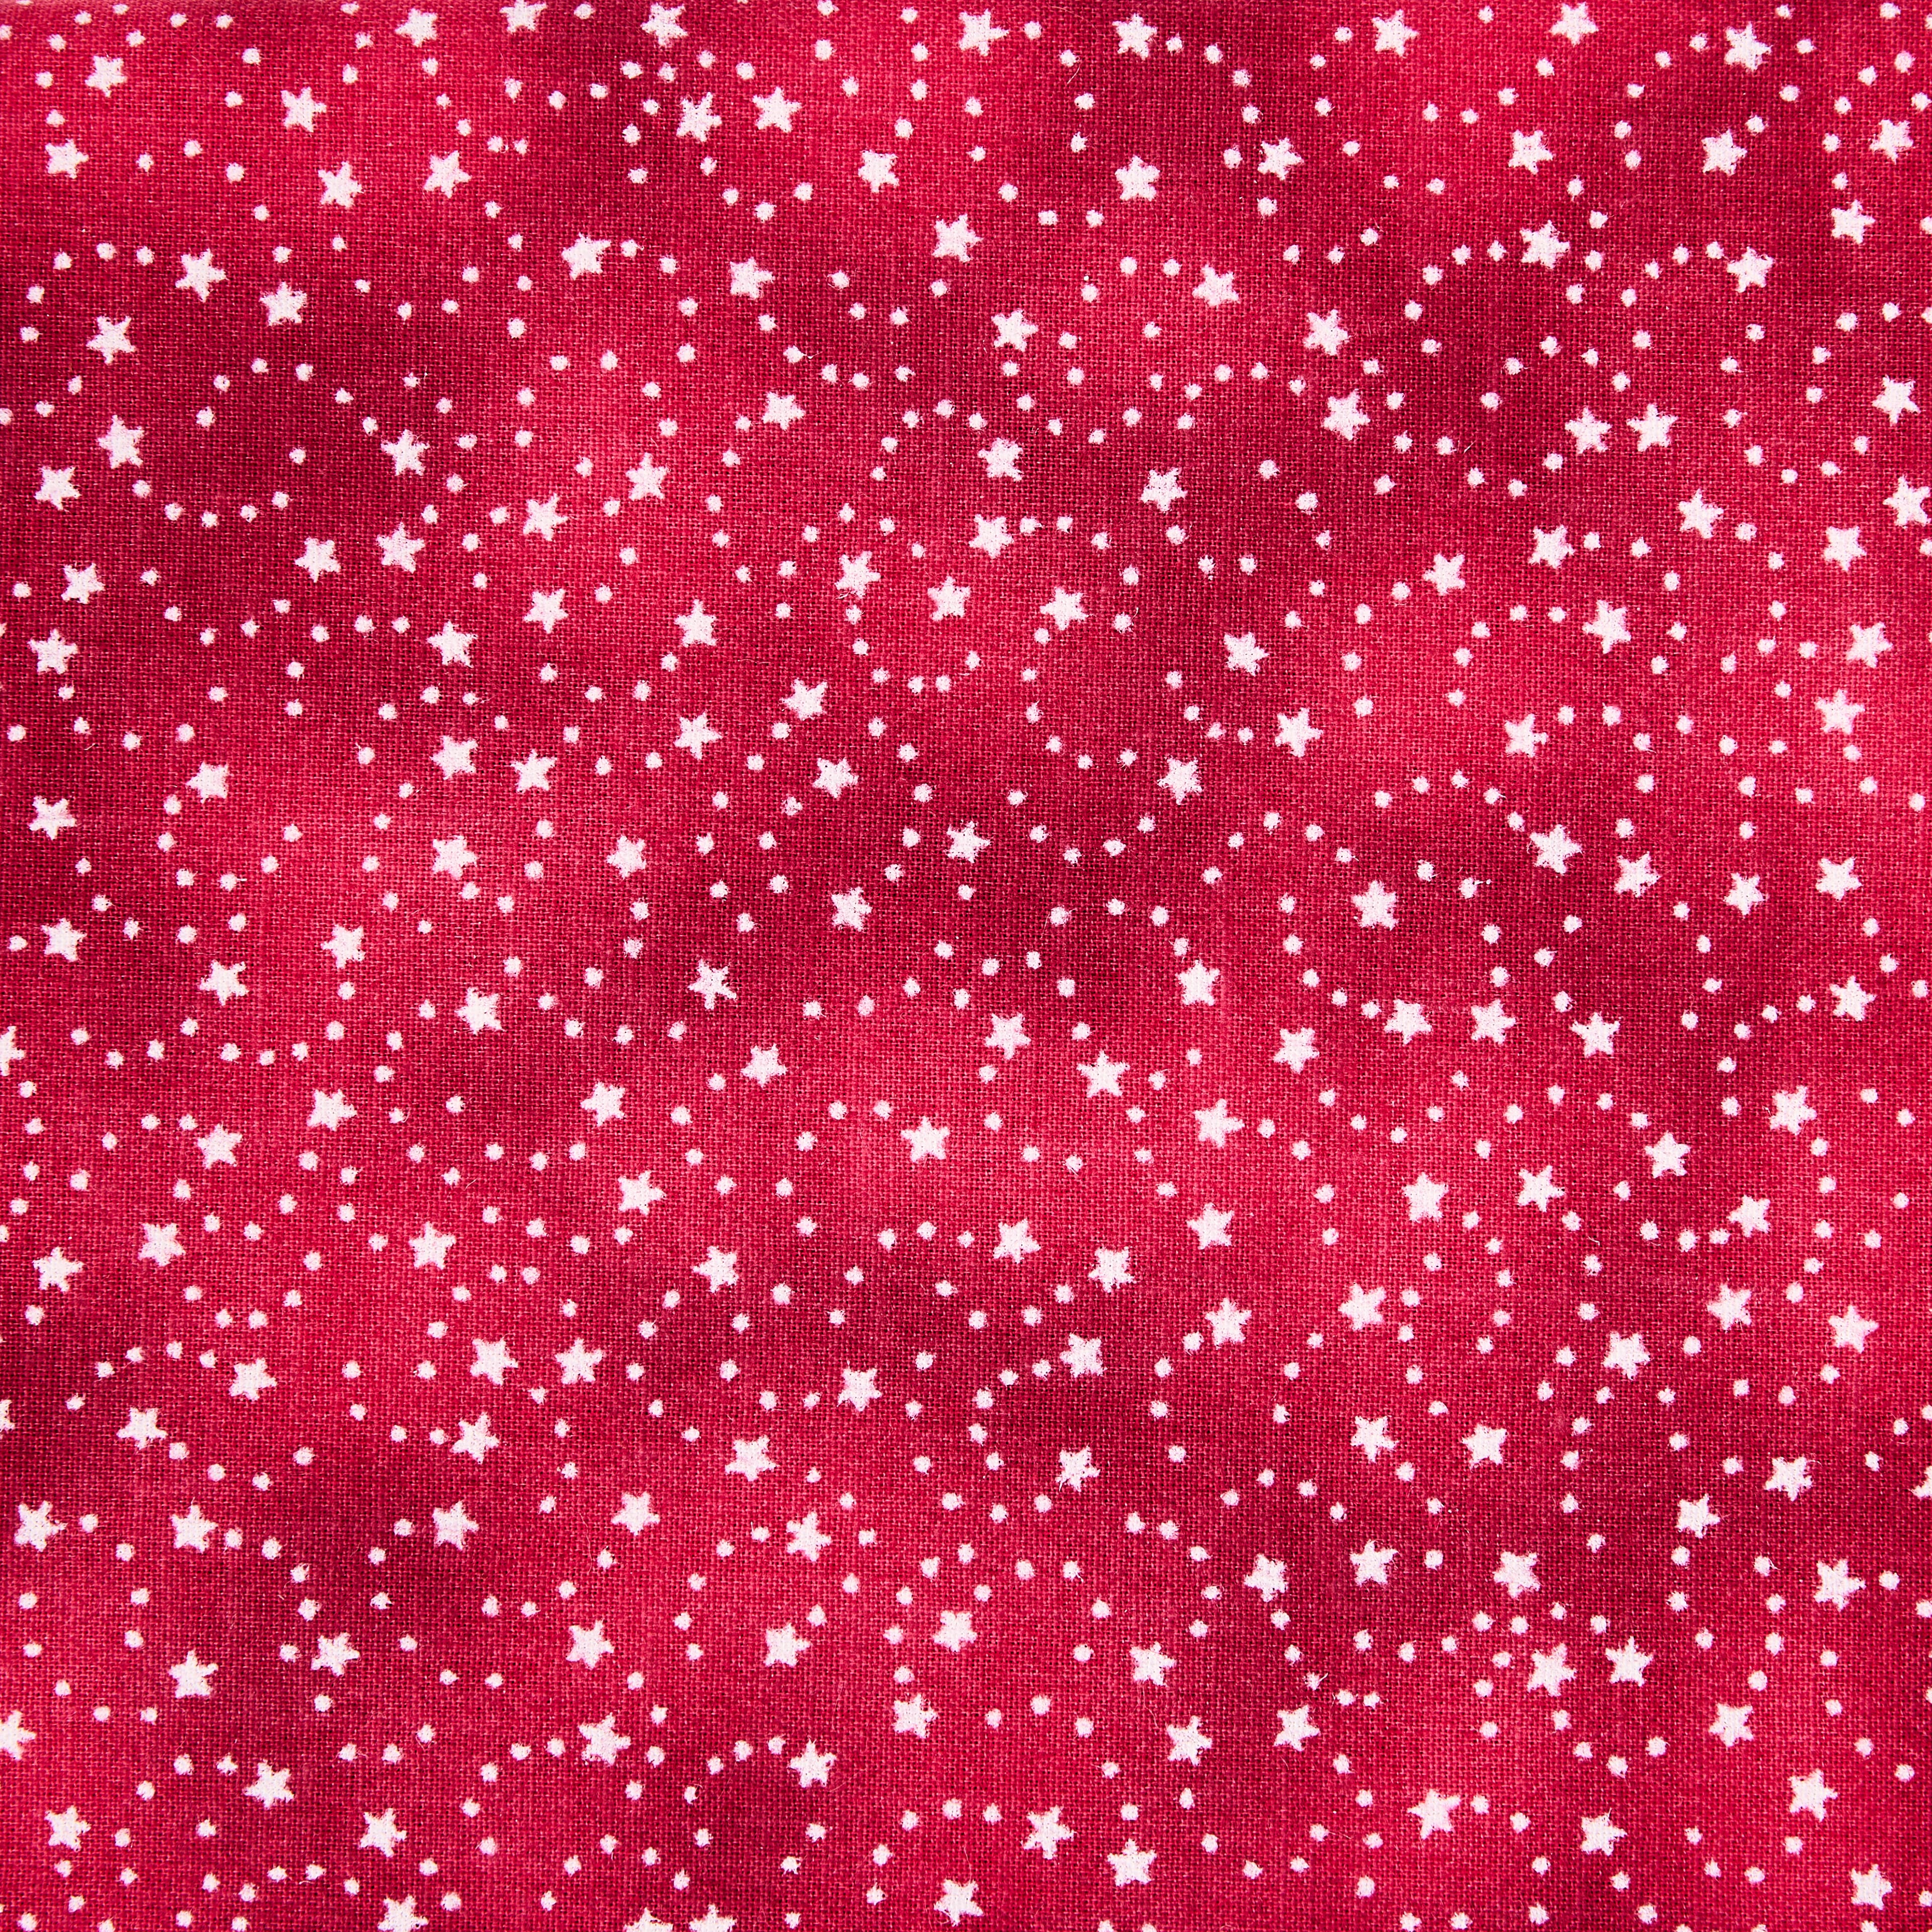 Fabric Traditions Red Swirling Stars Cotton Fabric